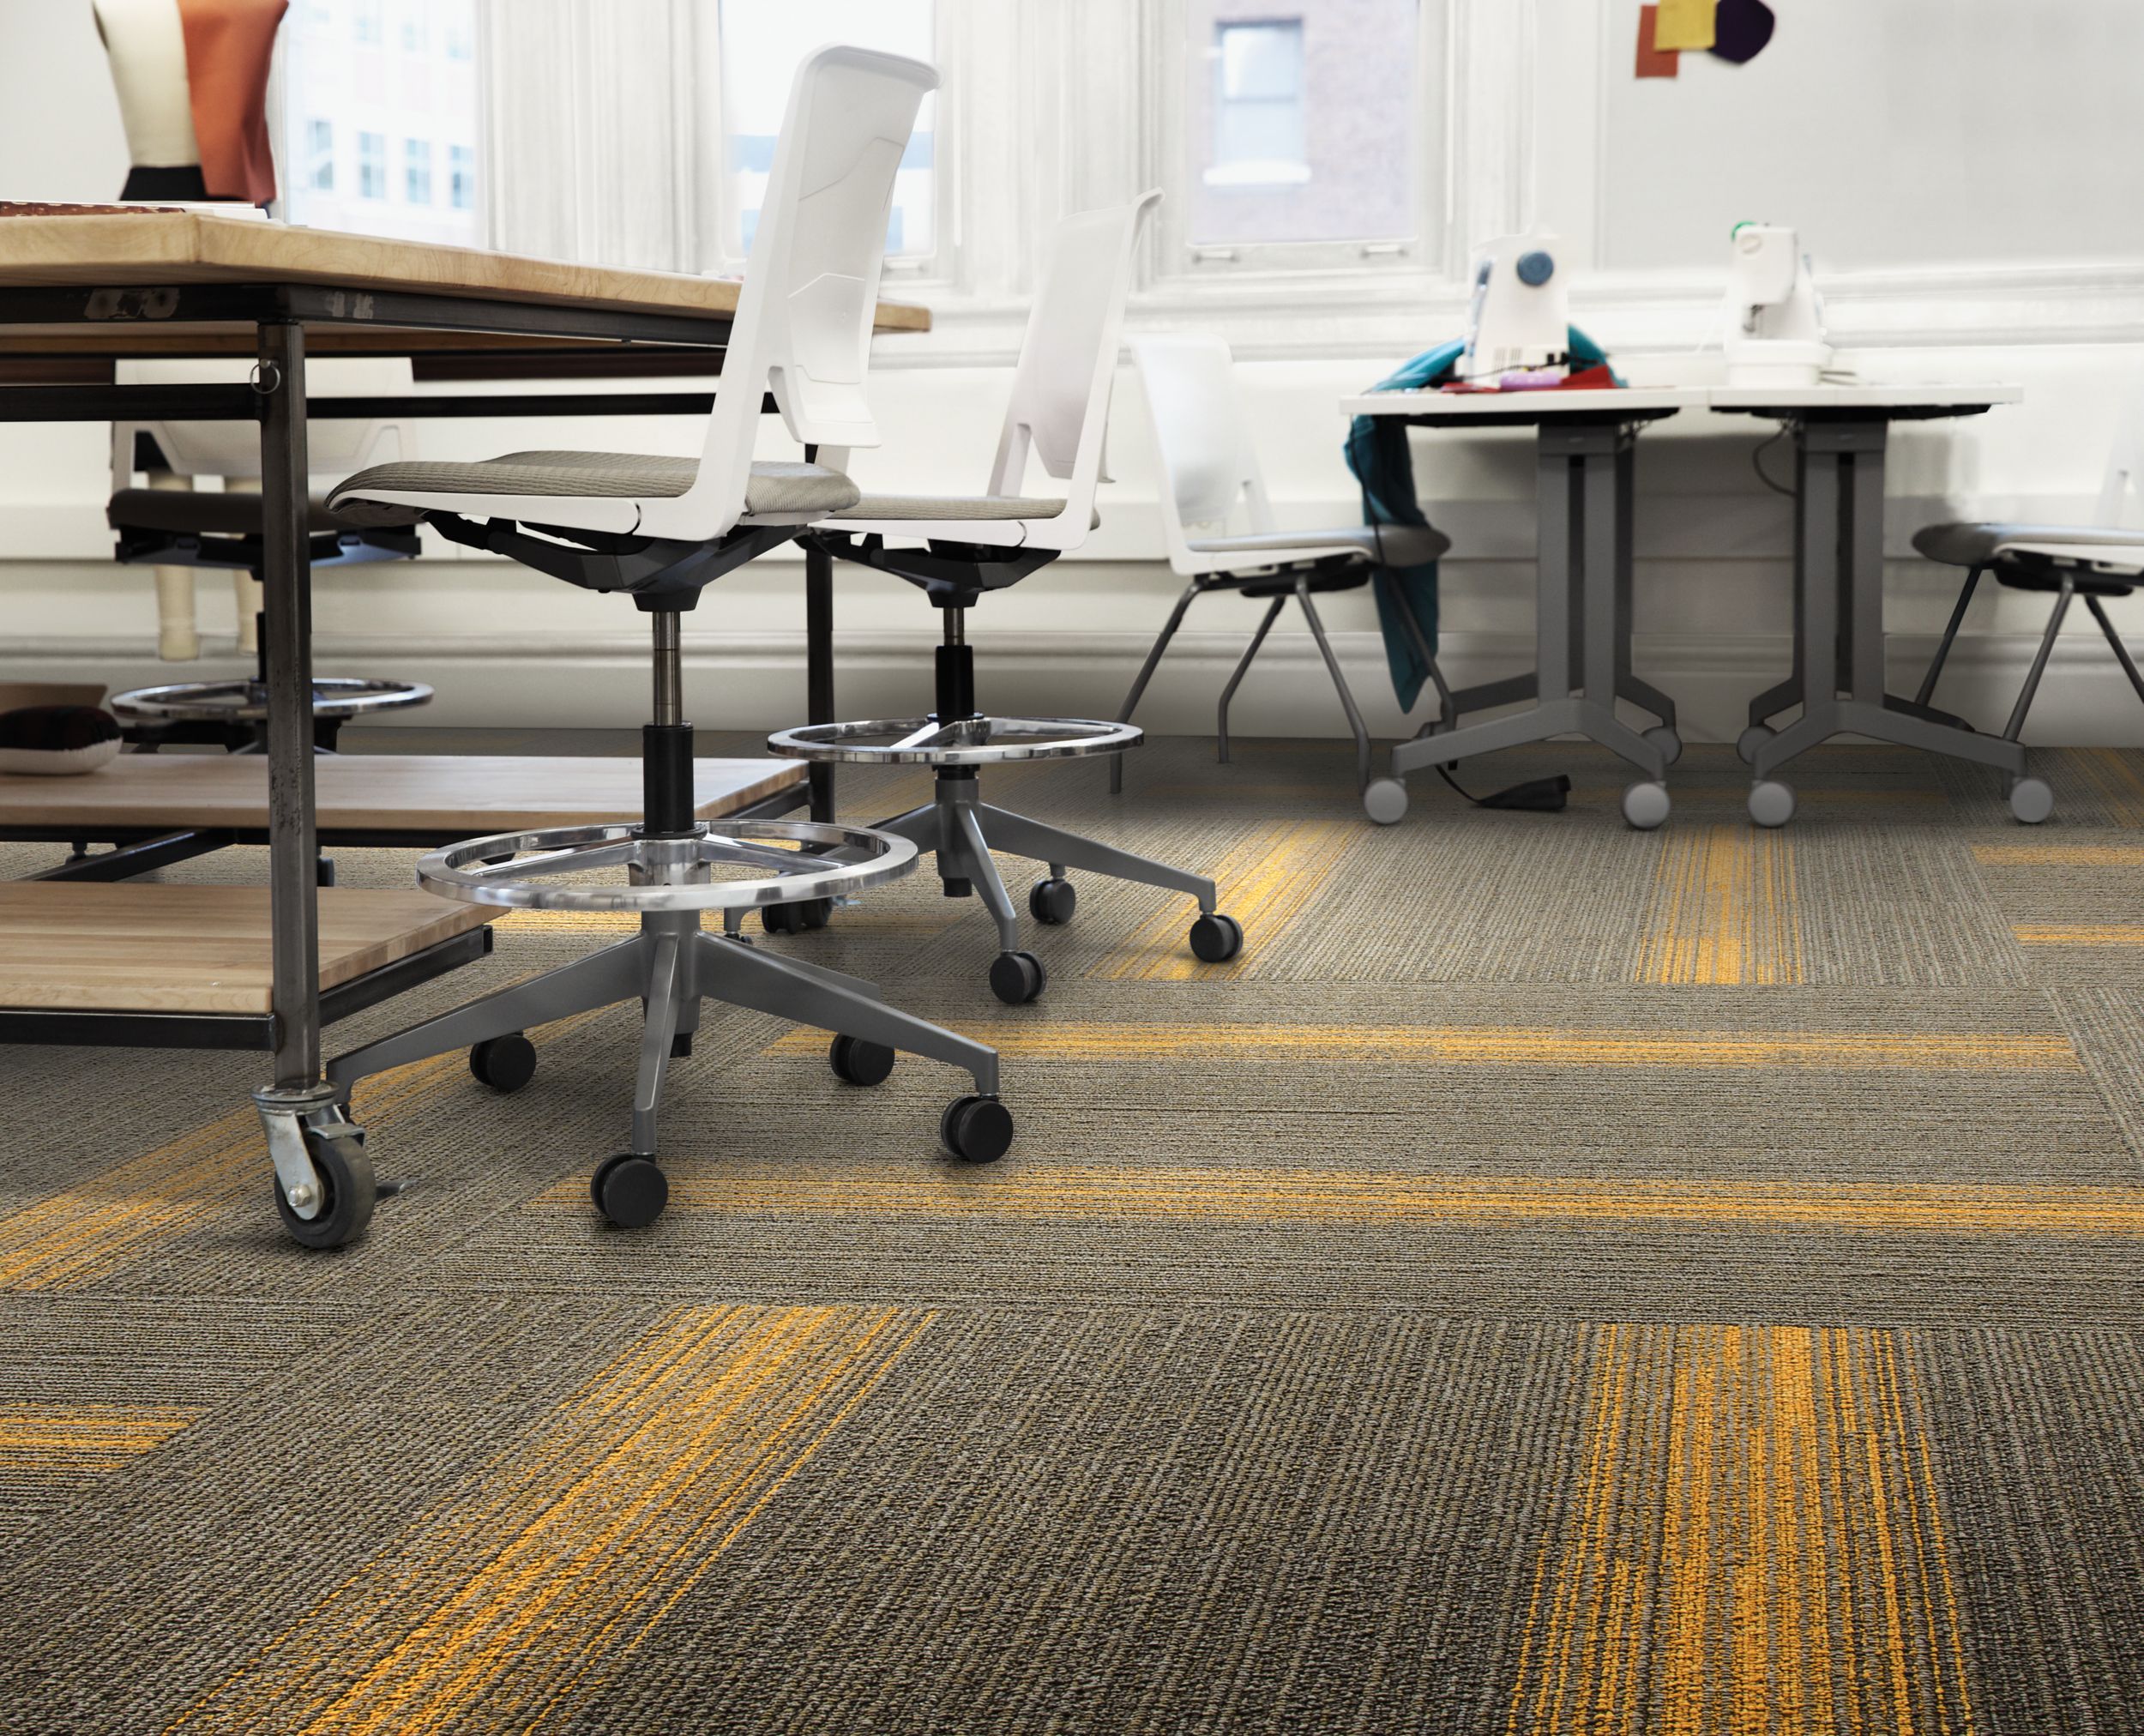 Interface Off Line plank carpet tile with sewing machines at workspaces imagen número 7